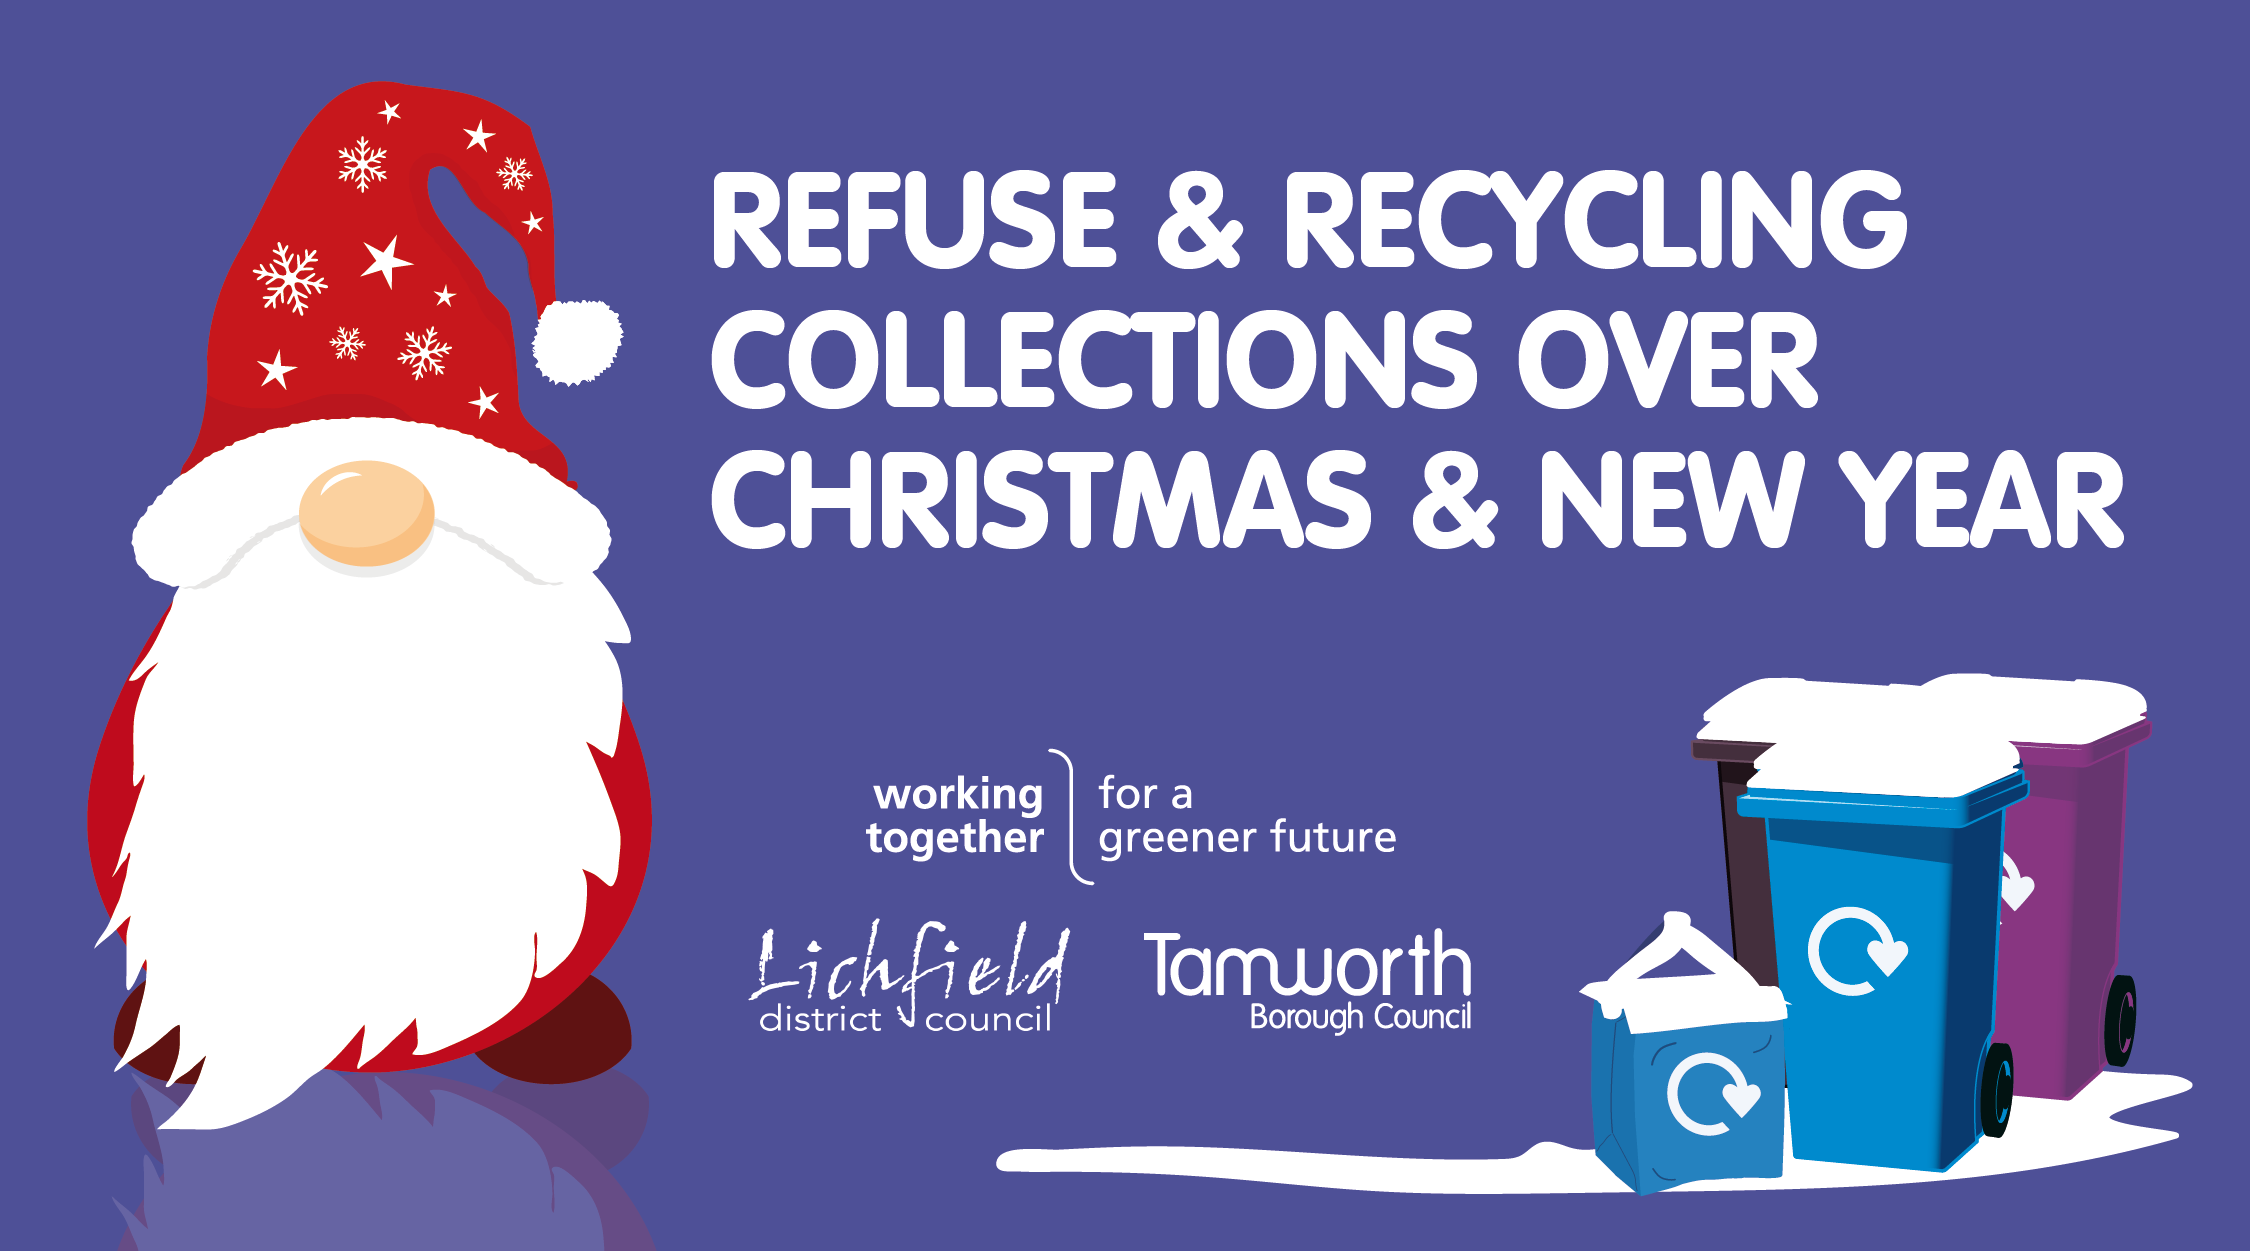 A poster to promote the refuse and recycling collections over the festive period.